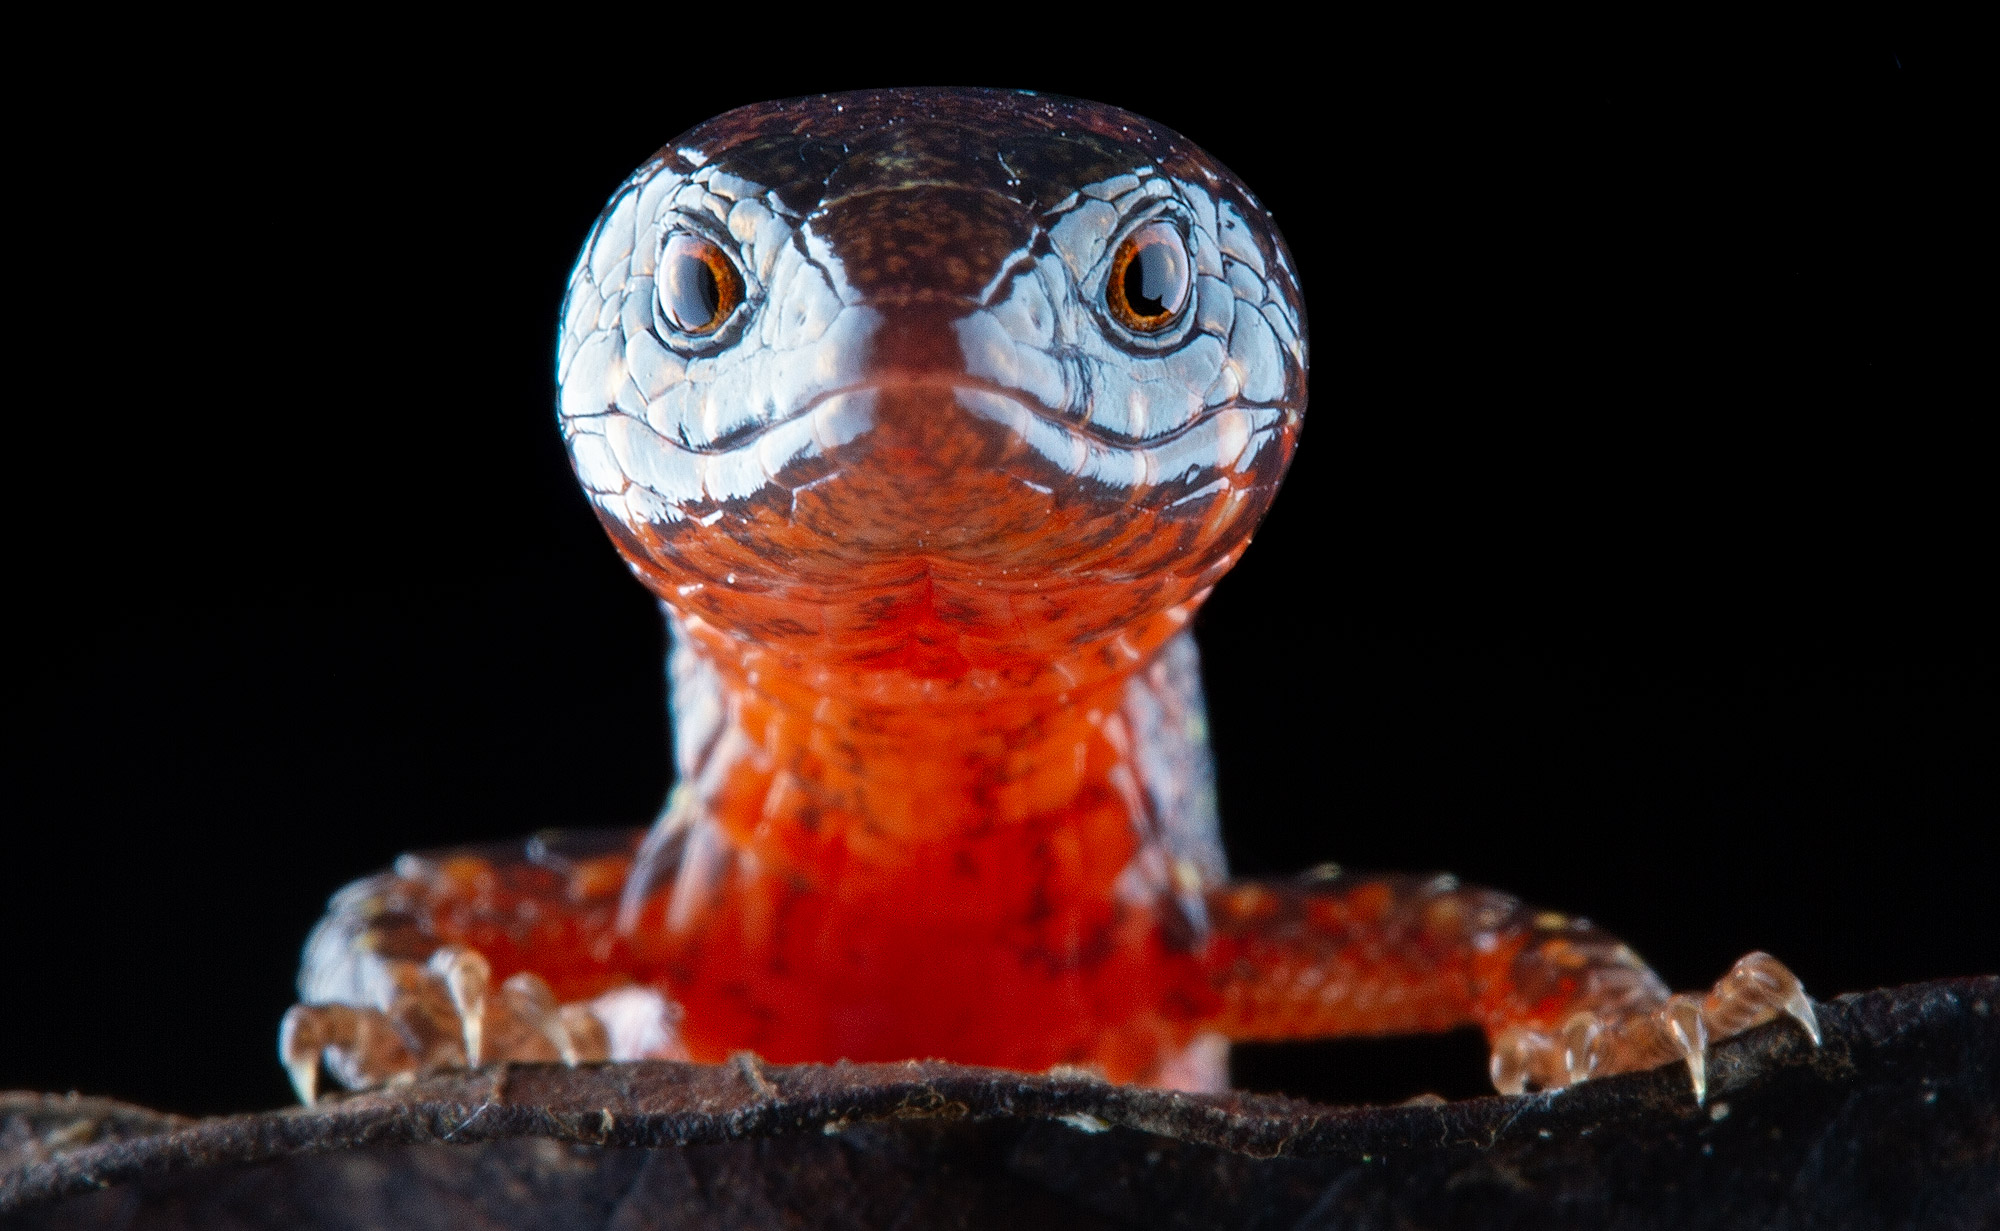 New species of lighbulb lizard looking directly into the camera